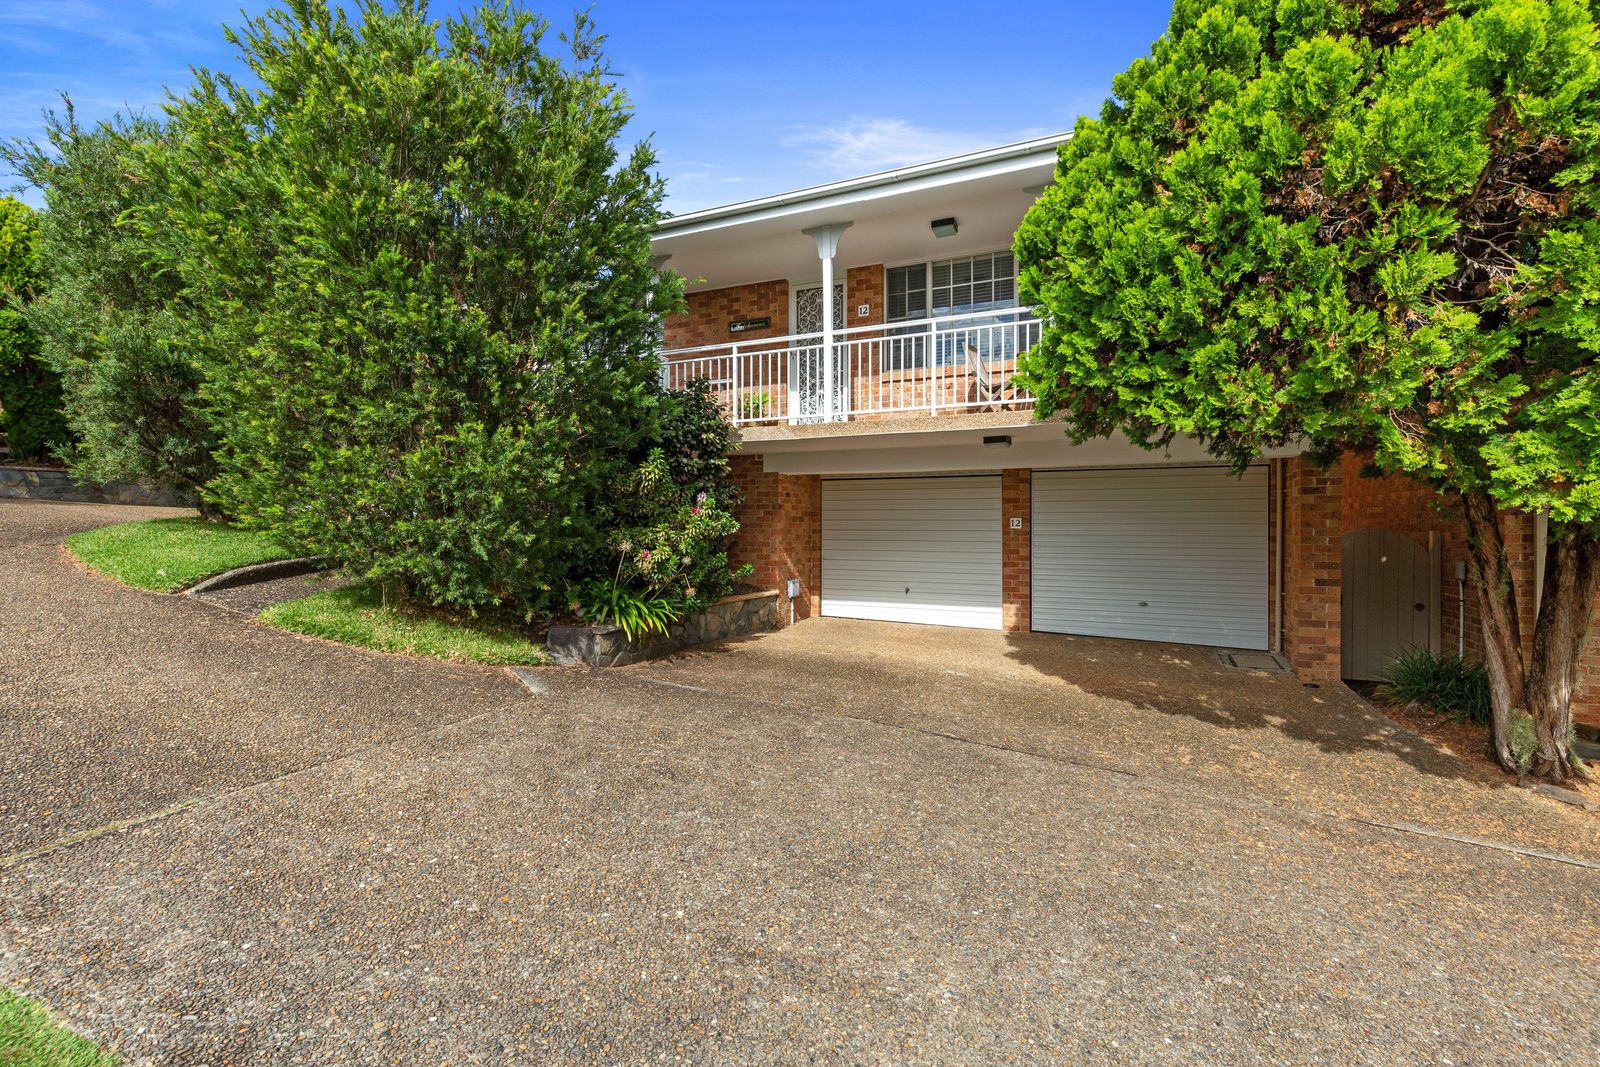 12/12 Homedale Crescent, Connells Point NSW 2221, Image 0